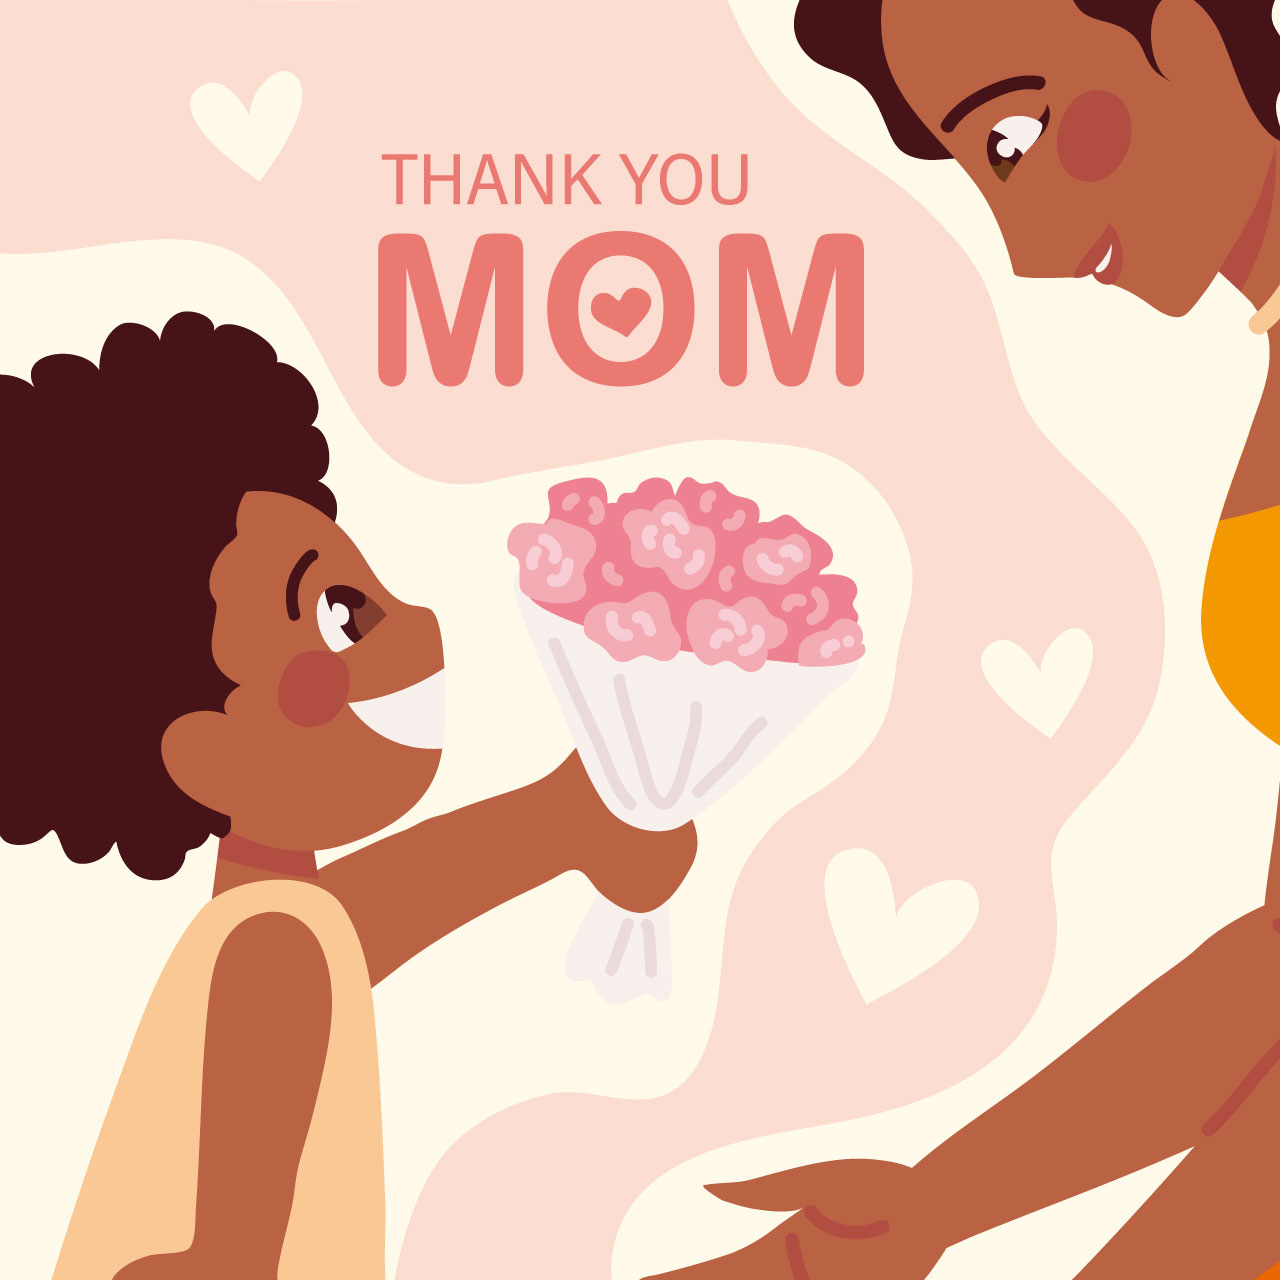 Thank you mom card mothers day cartoon illustration image hand drawing sketch